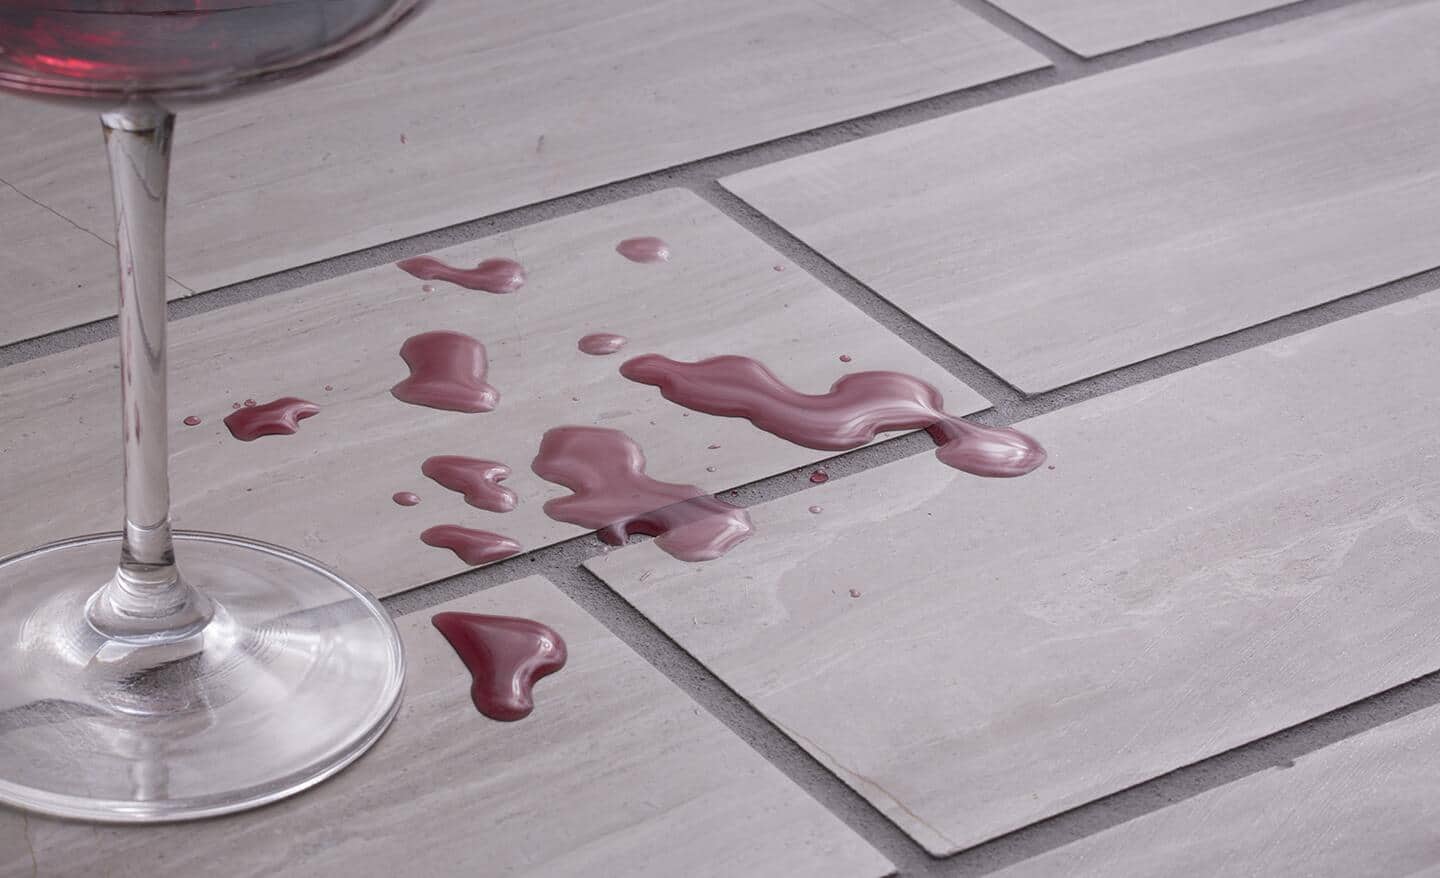 A tiled floor with grout has a glass with spilled red liquid on the tile's surface.